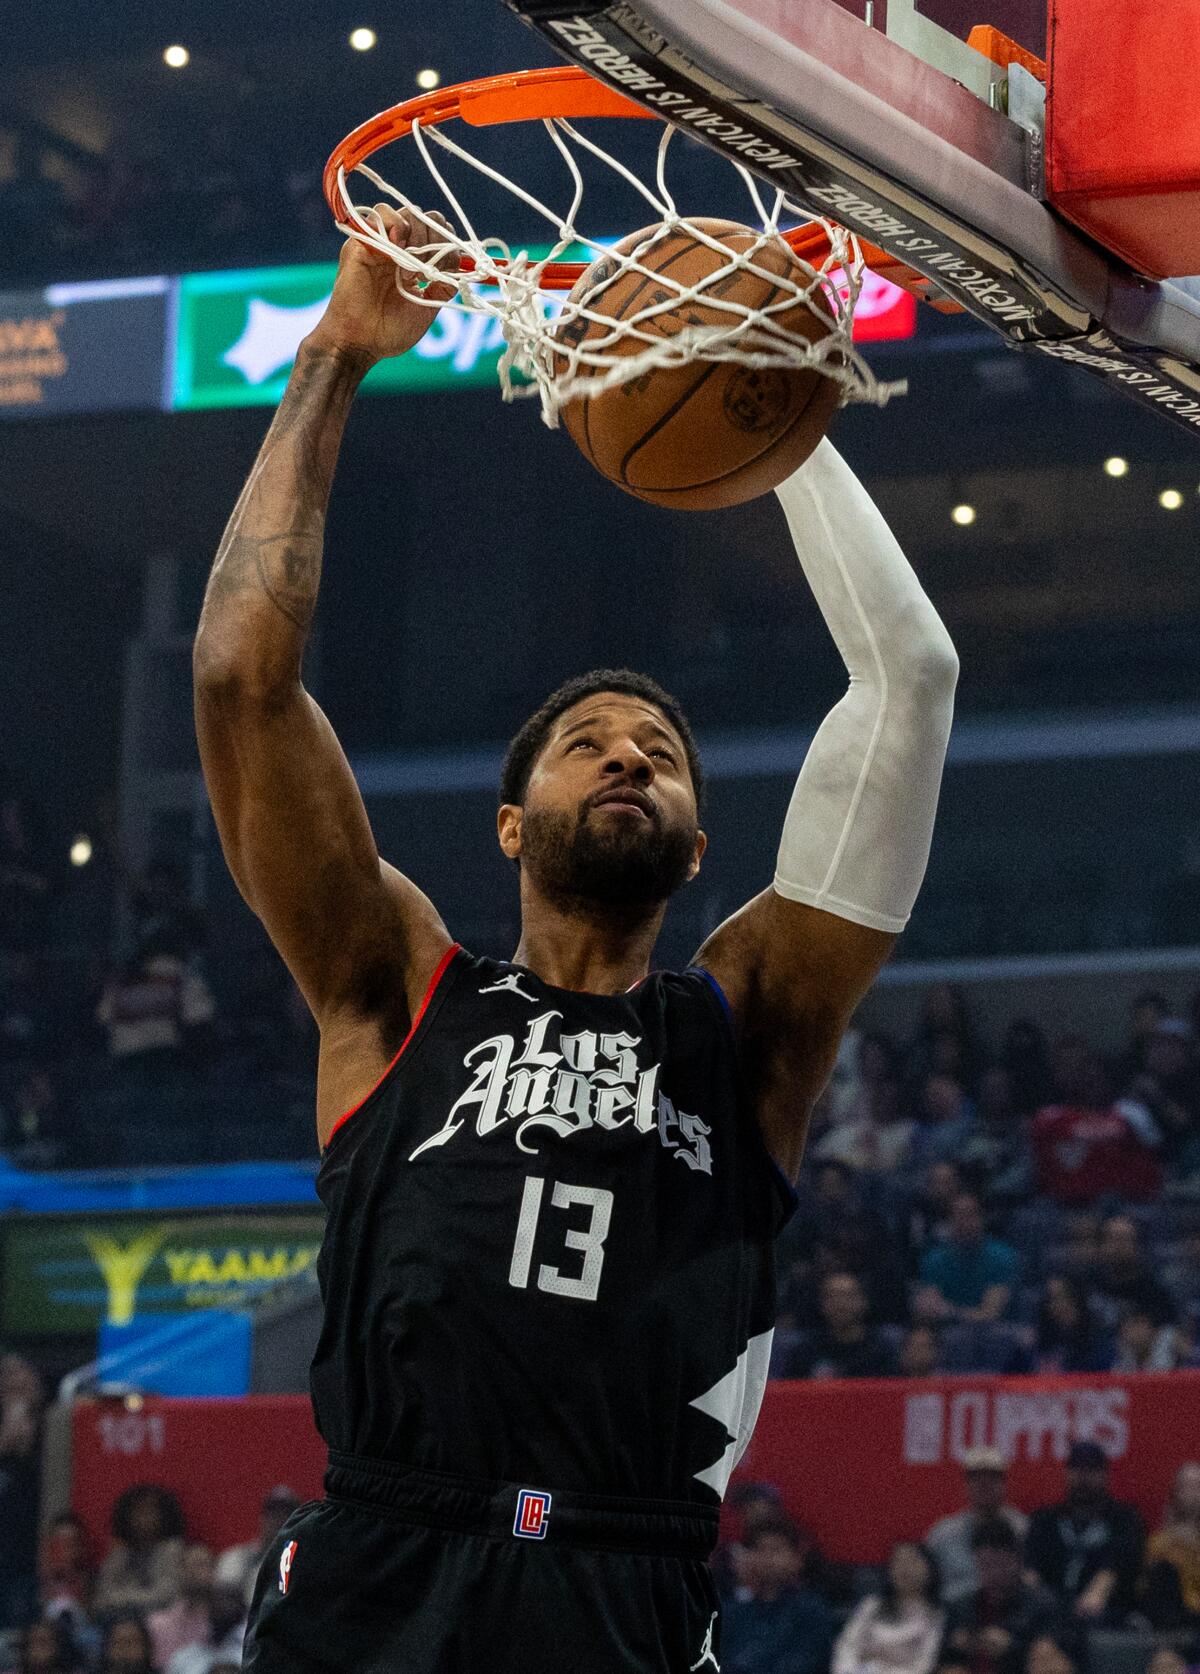 Clippers forward Paul George dunks against the Pistons in the first quarter Saturday.